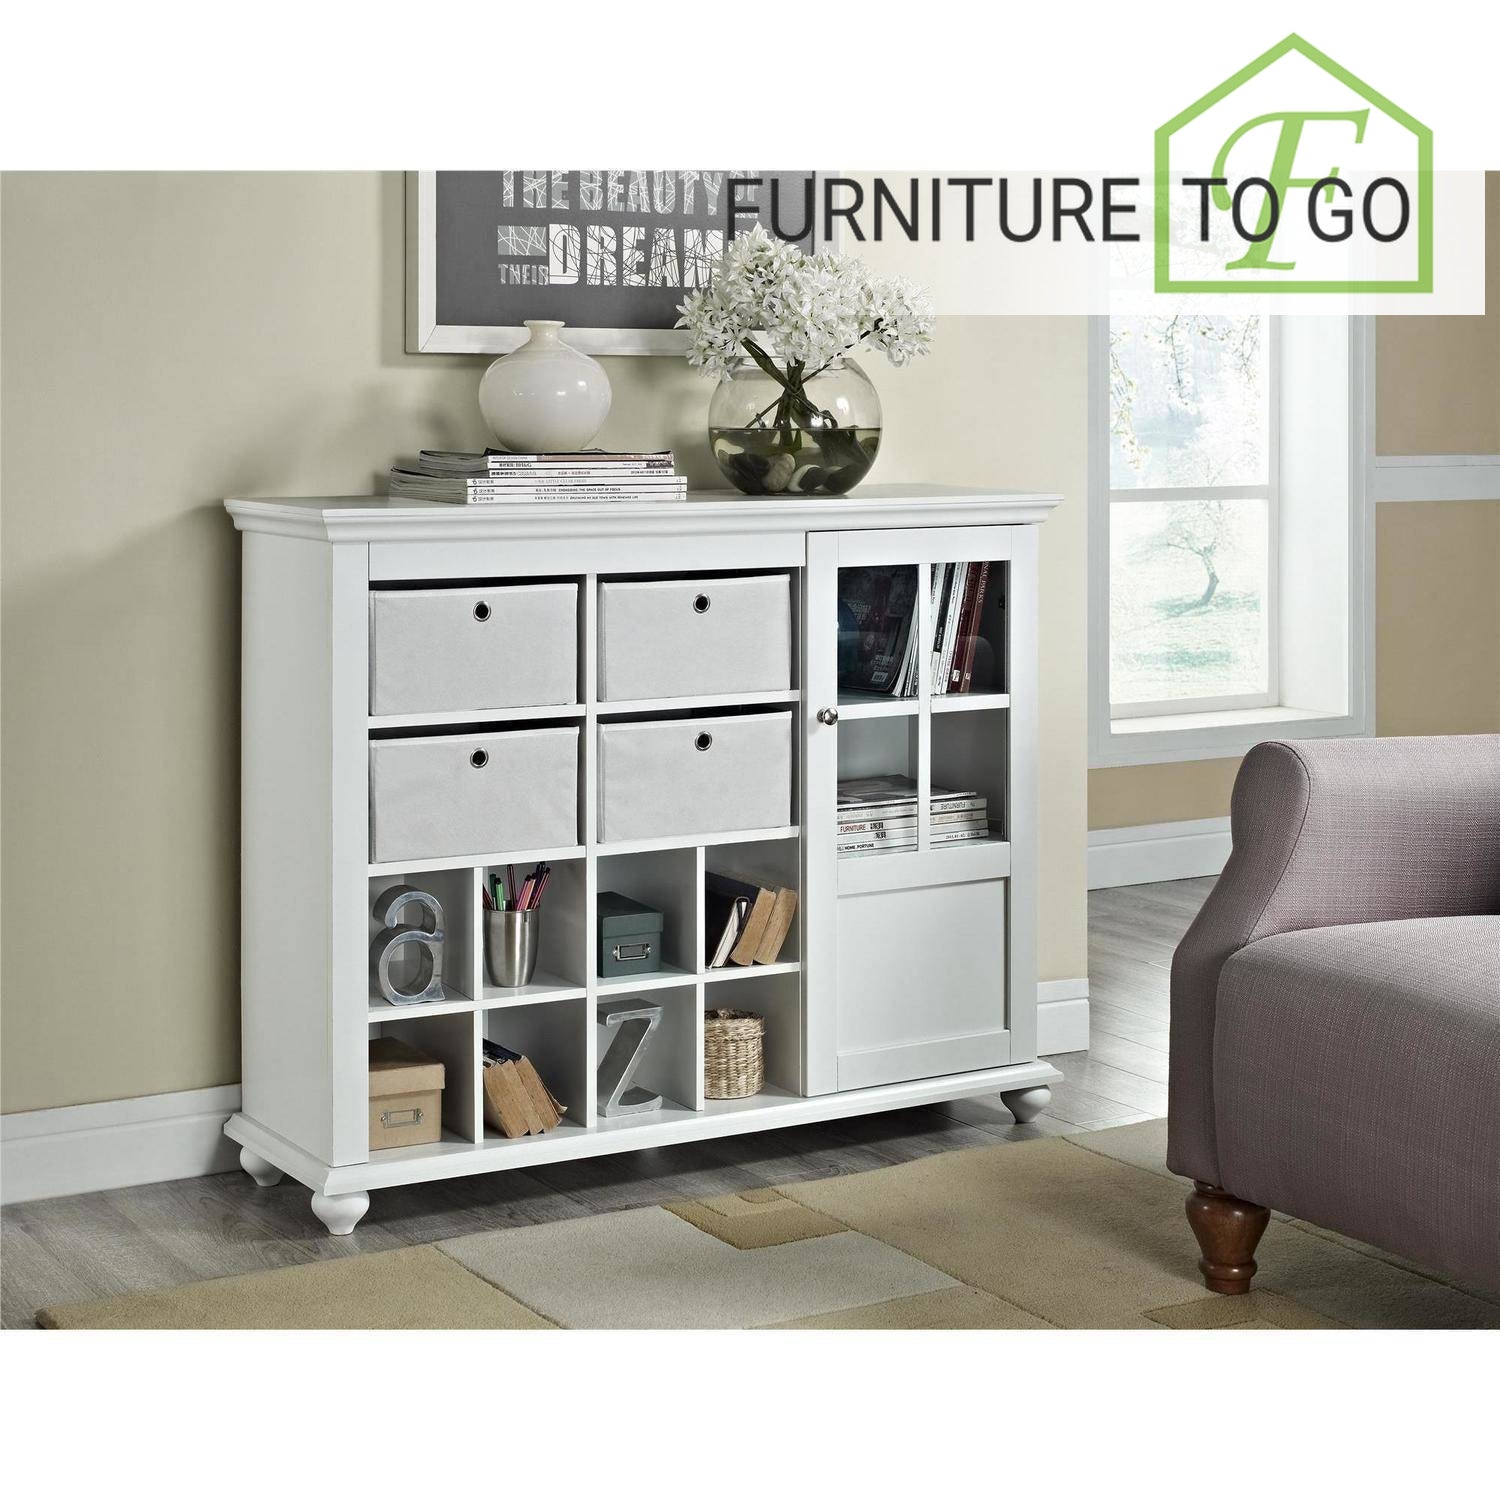 Clearance Furniture In Dallas 149 99 White Entrywa Furniture To